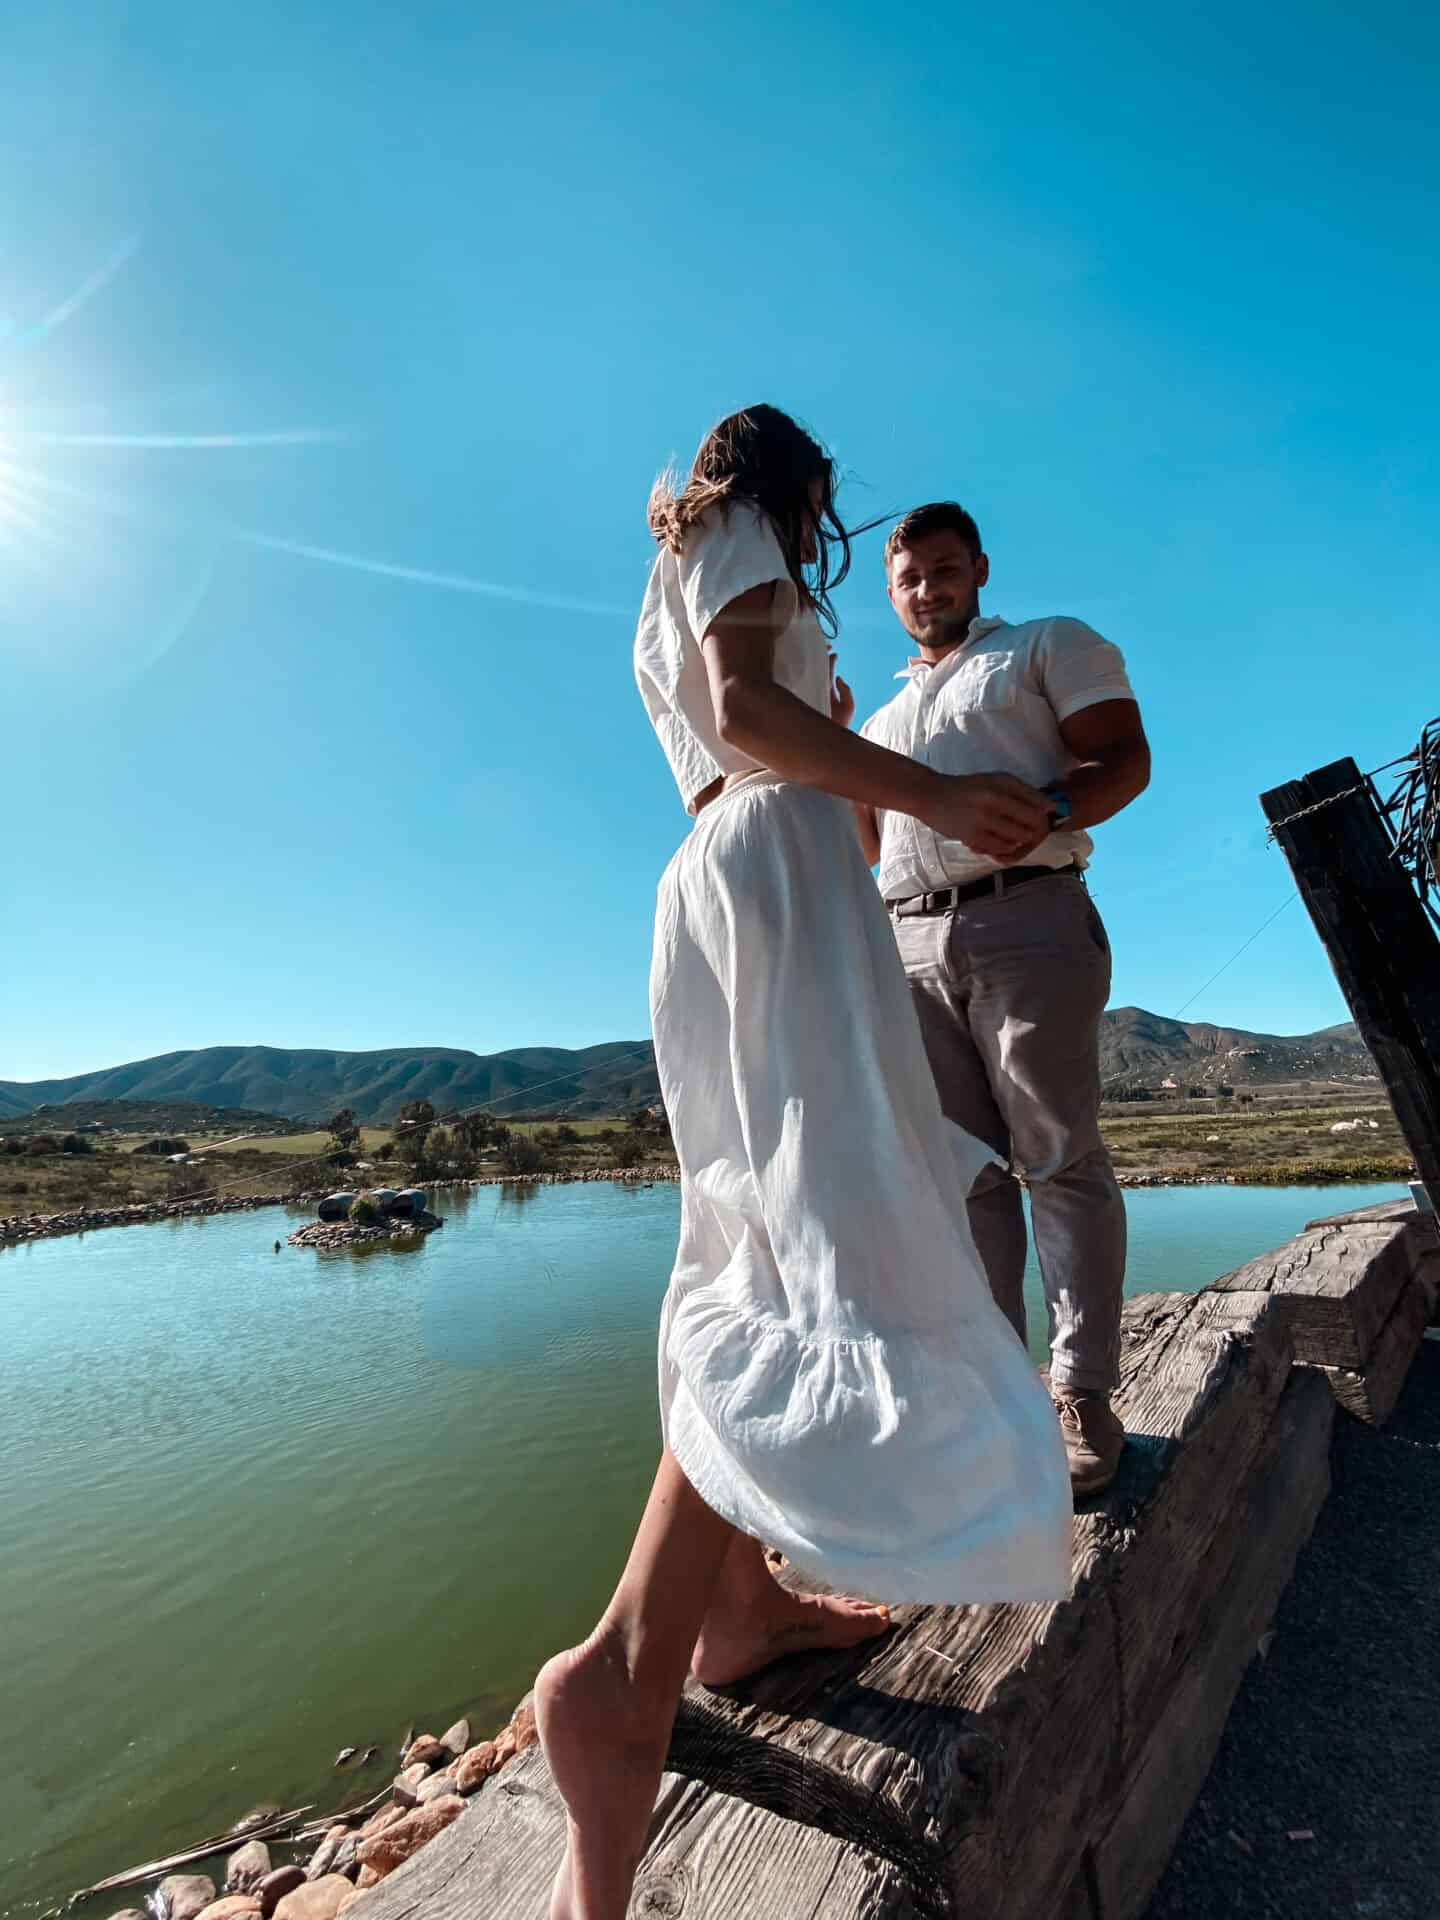 Woman in white dress and man above a green lake in Mexican wine country